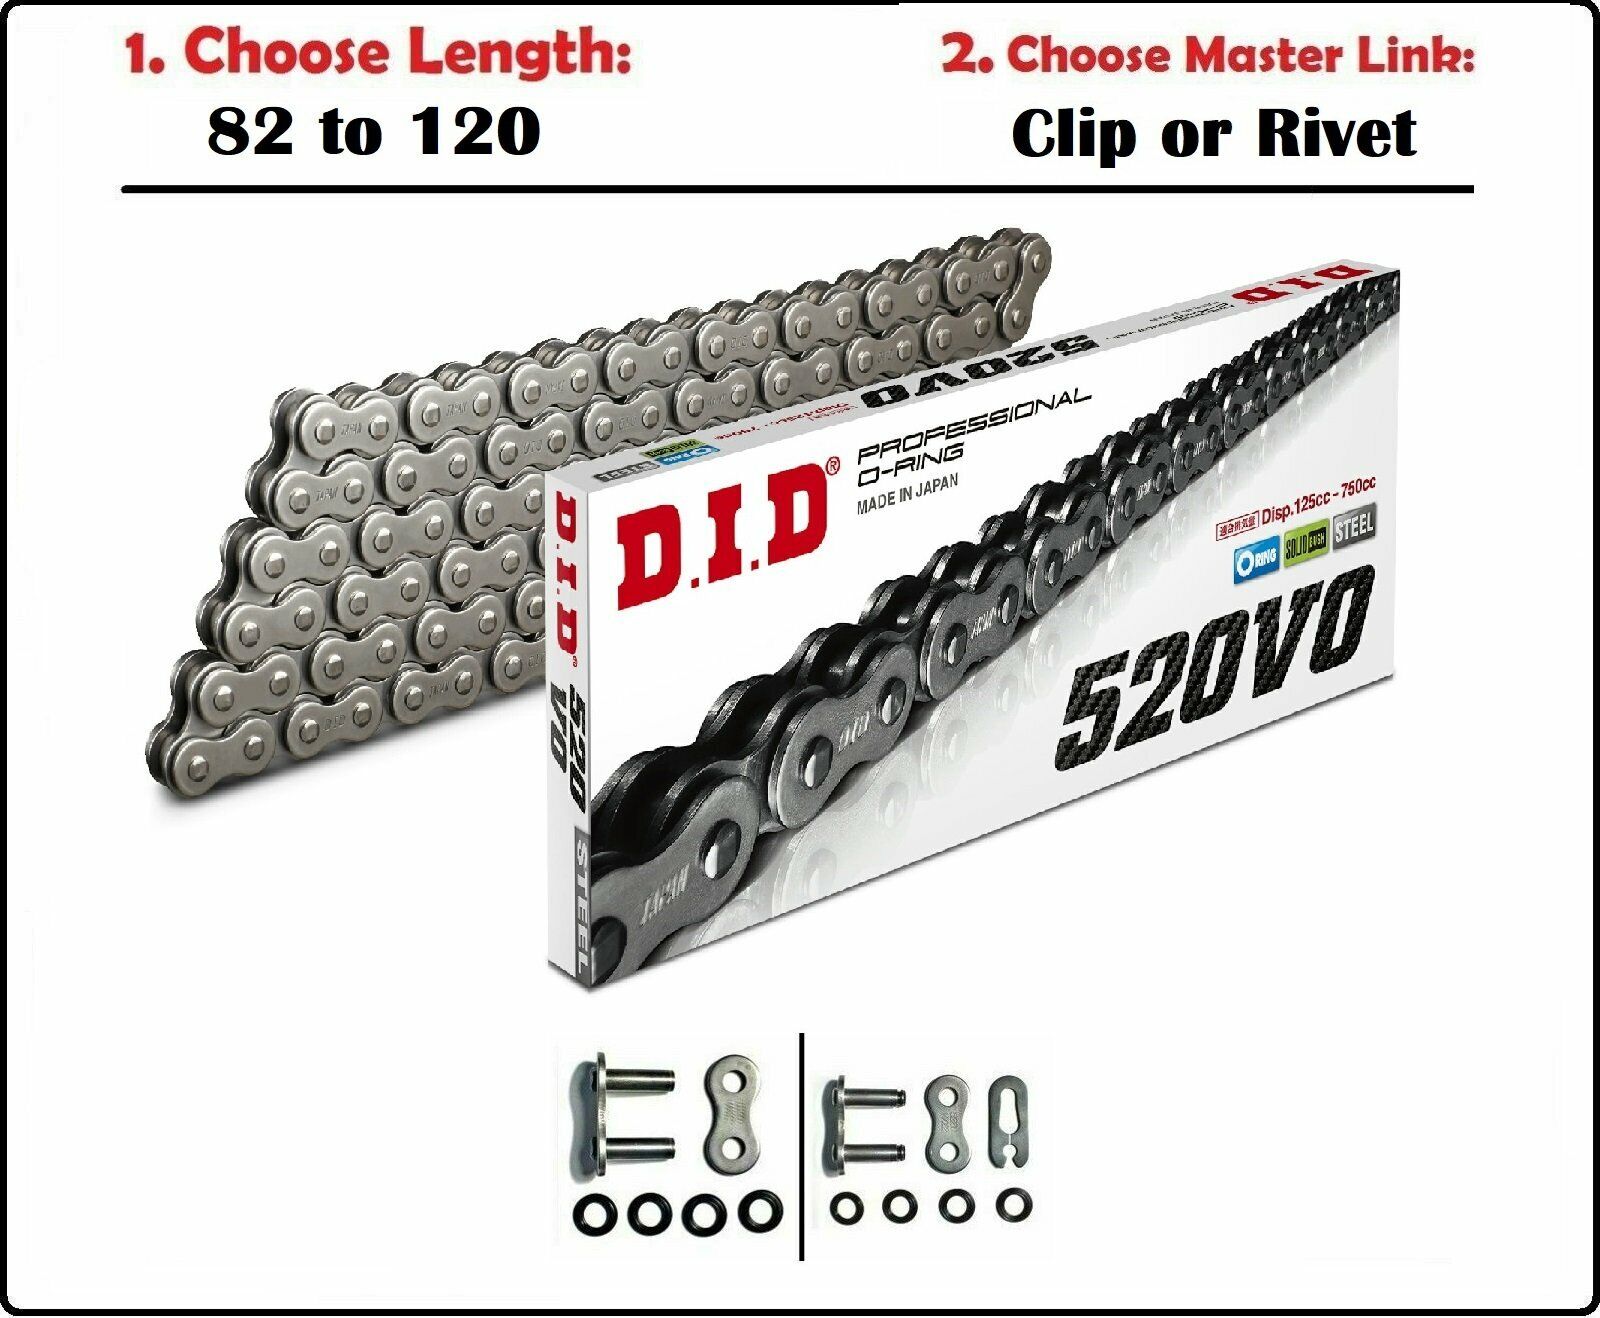 D.I.D DID 520 VO Oring Drive Chain Natural with Clip or Rivet Master Link